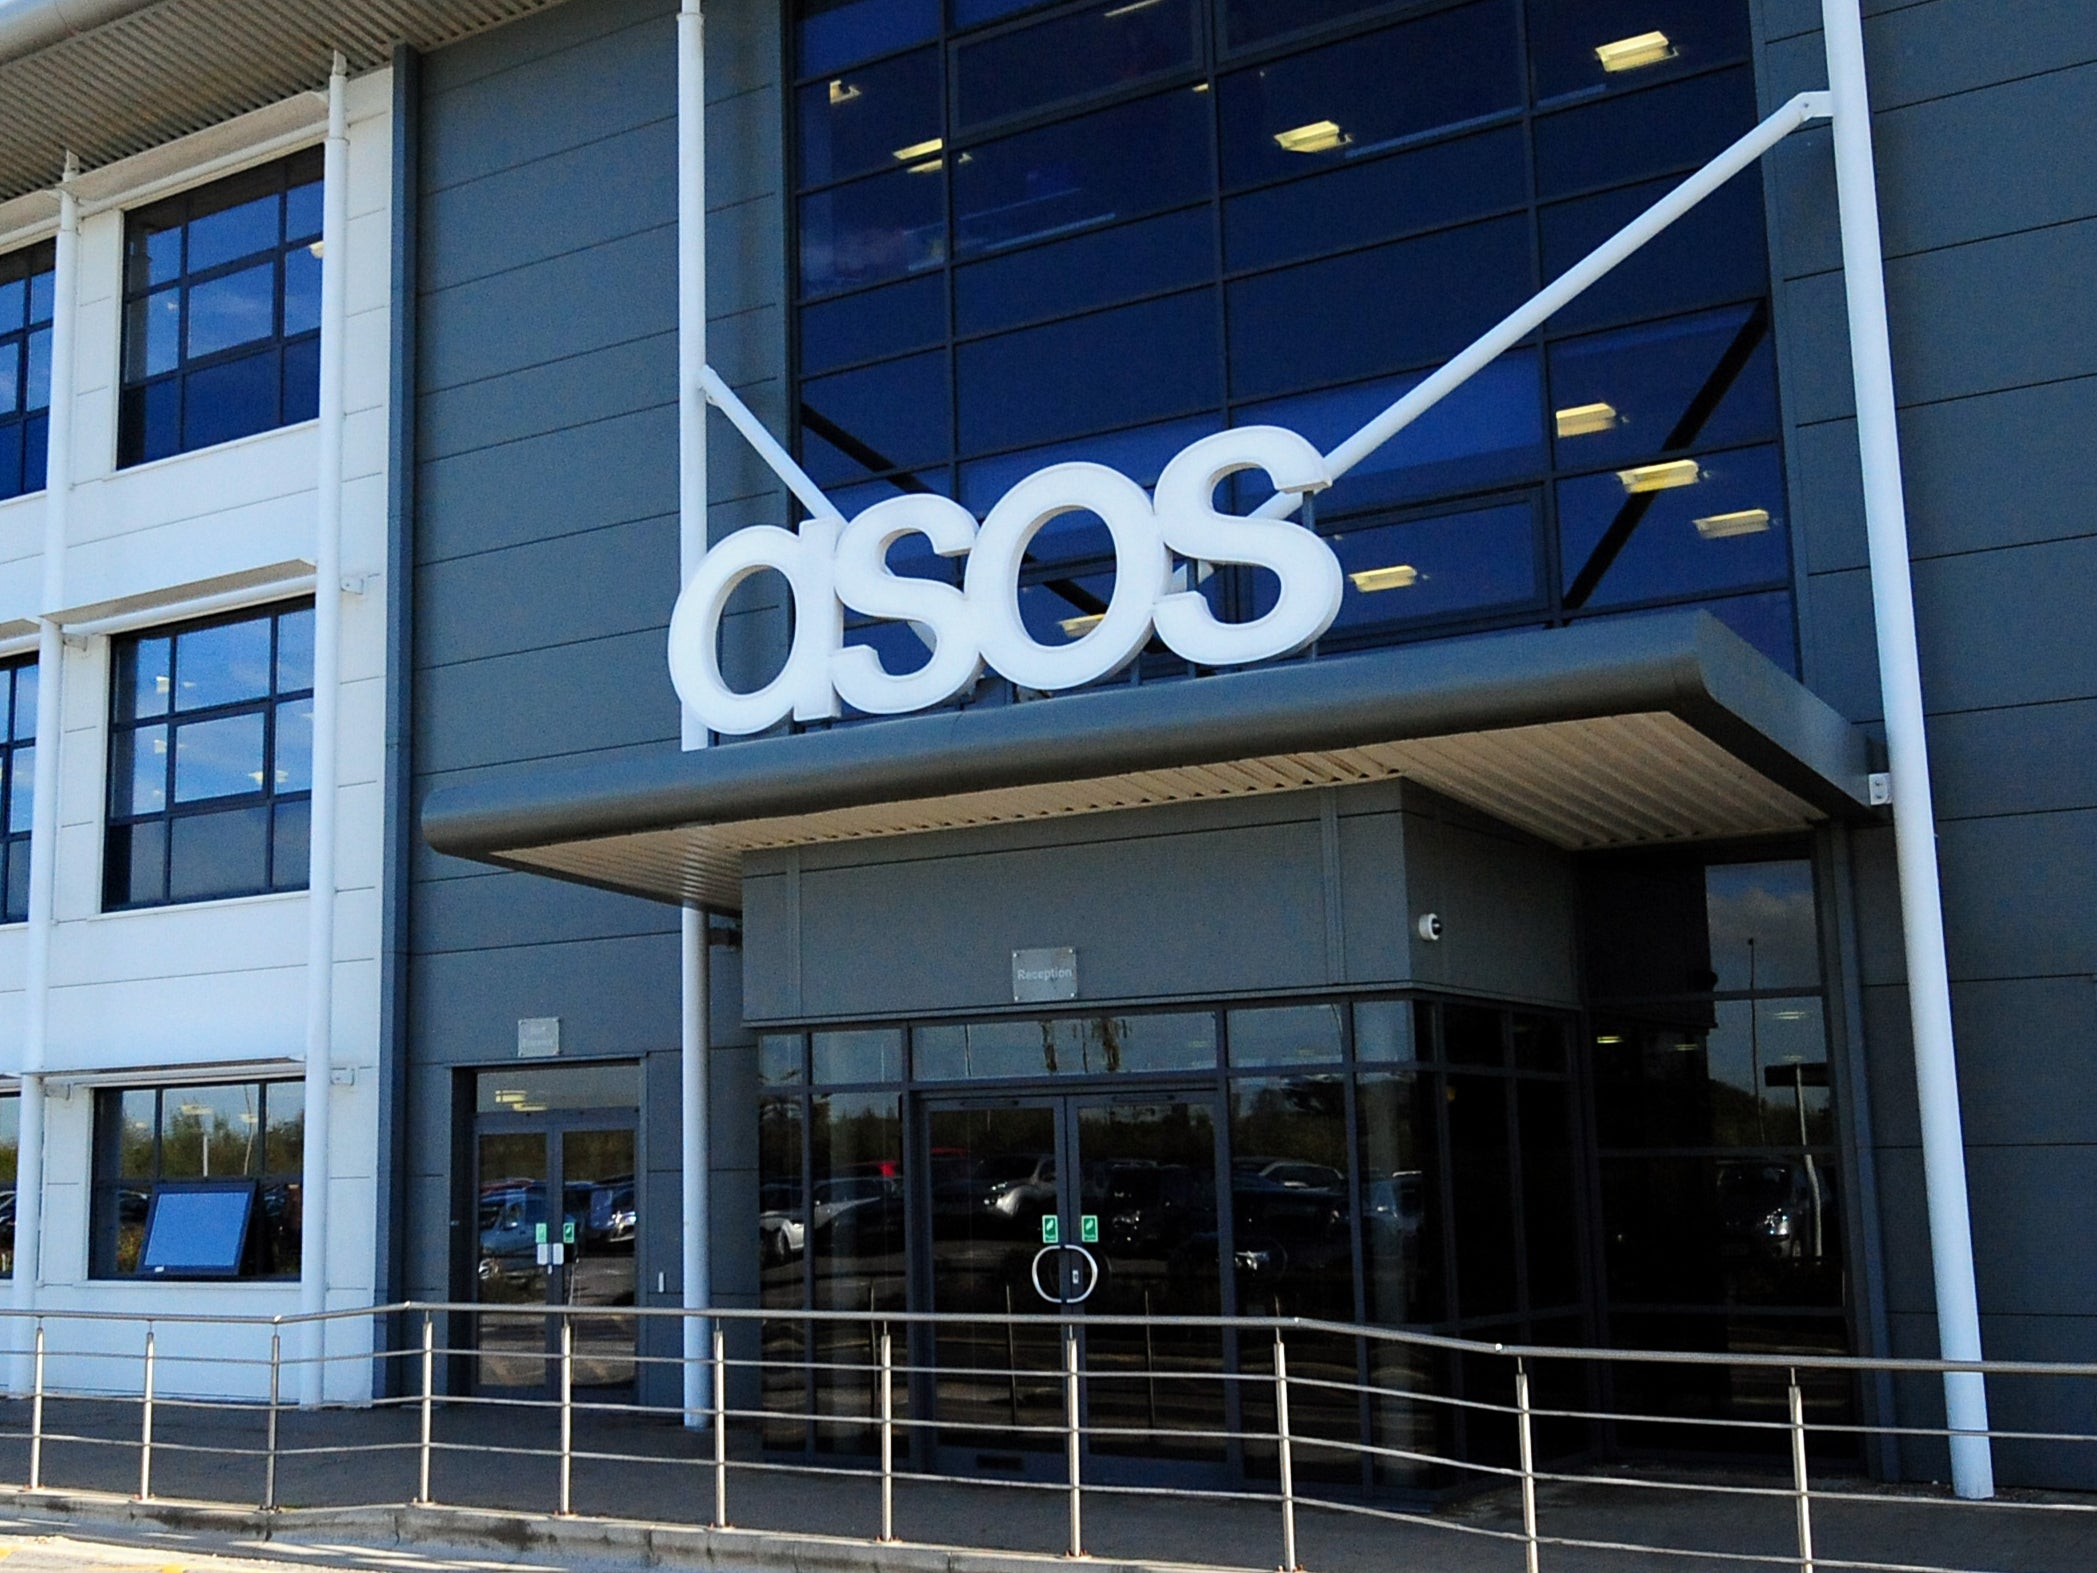 Asos distribution centre in South Yorkshire